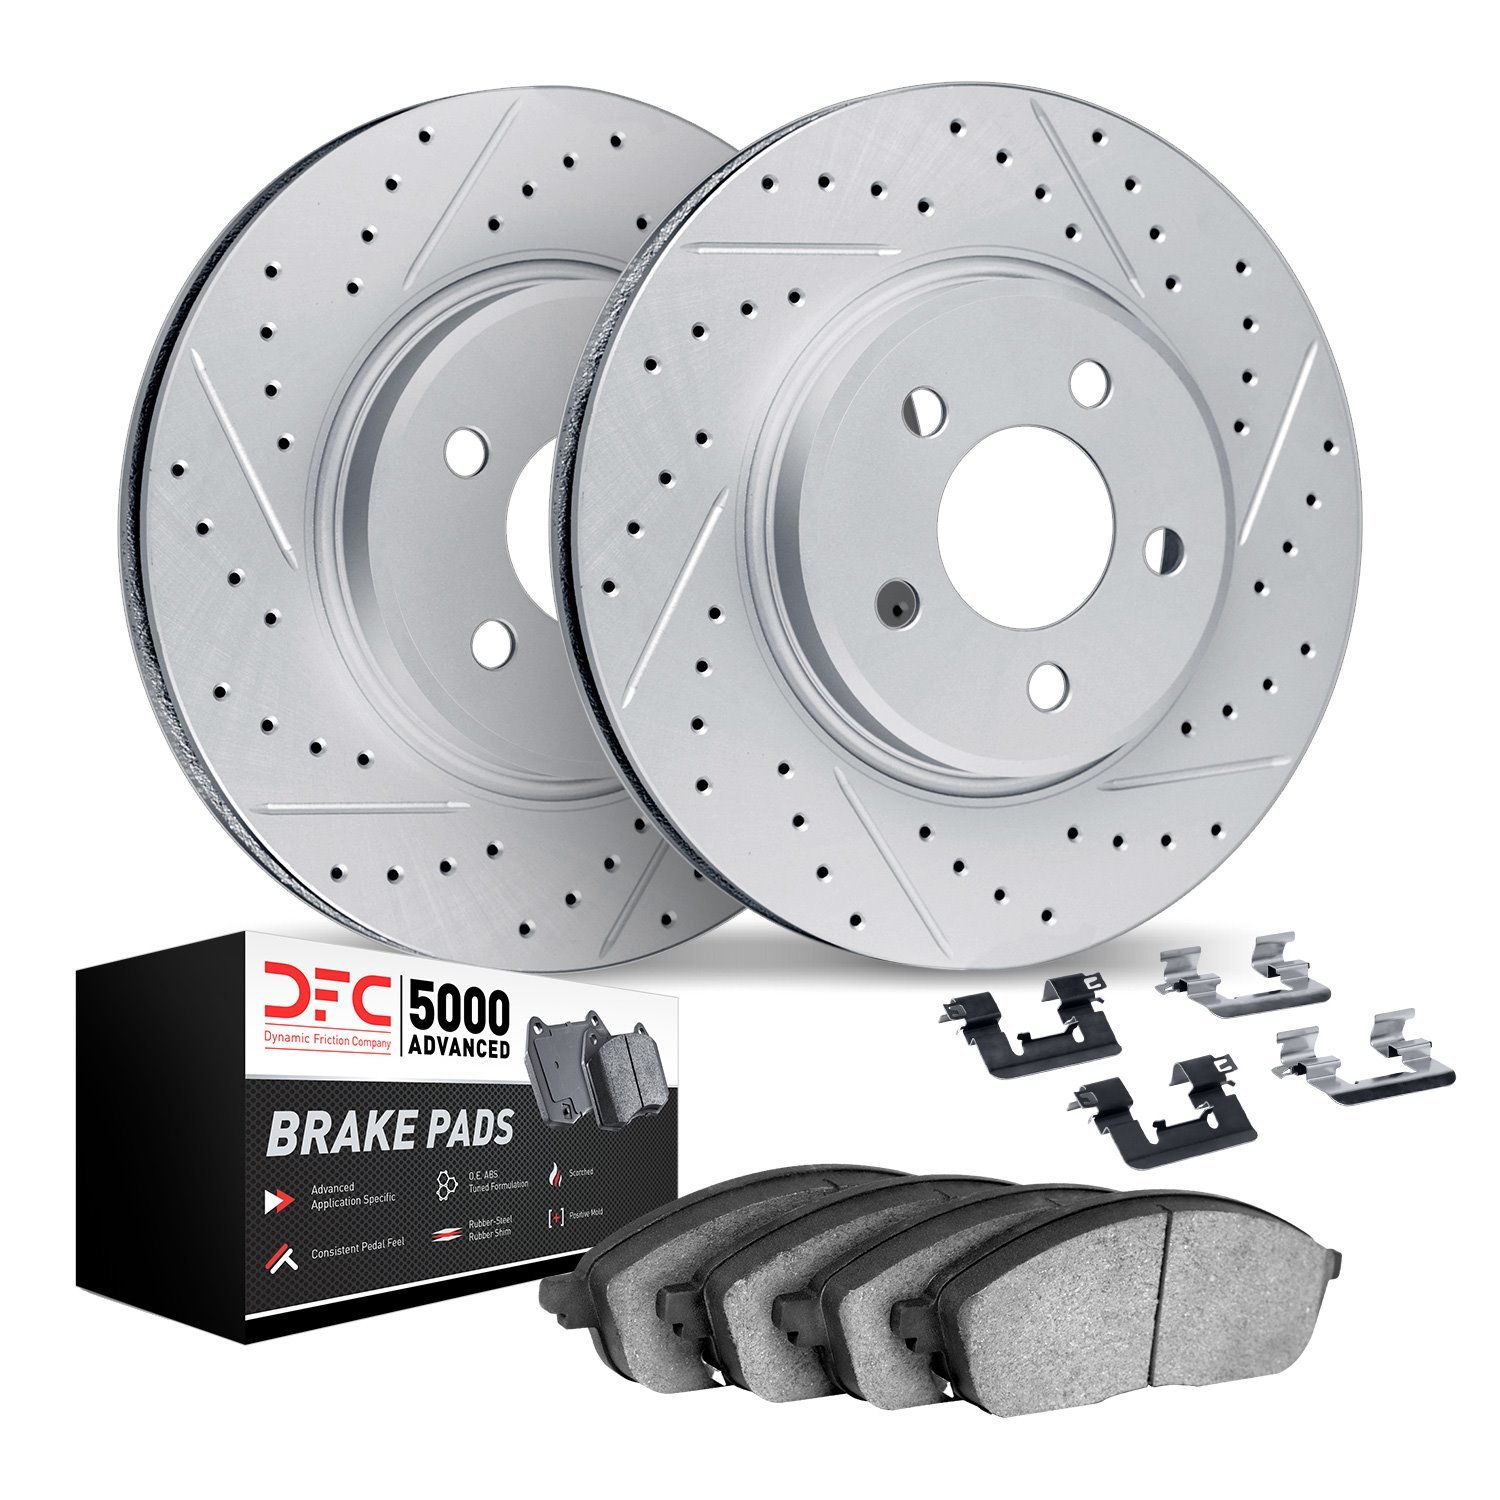 2512-31100 Geoperformance Drilled/Slotted Rotors w/5000 Advanced Brake Pads Kit & Hardware, 2002-2006 BMW, Position: Rear